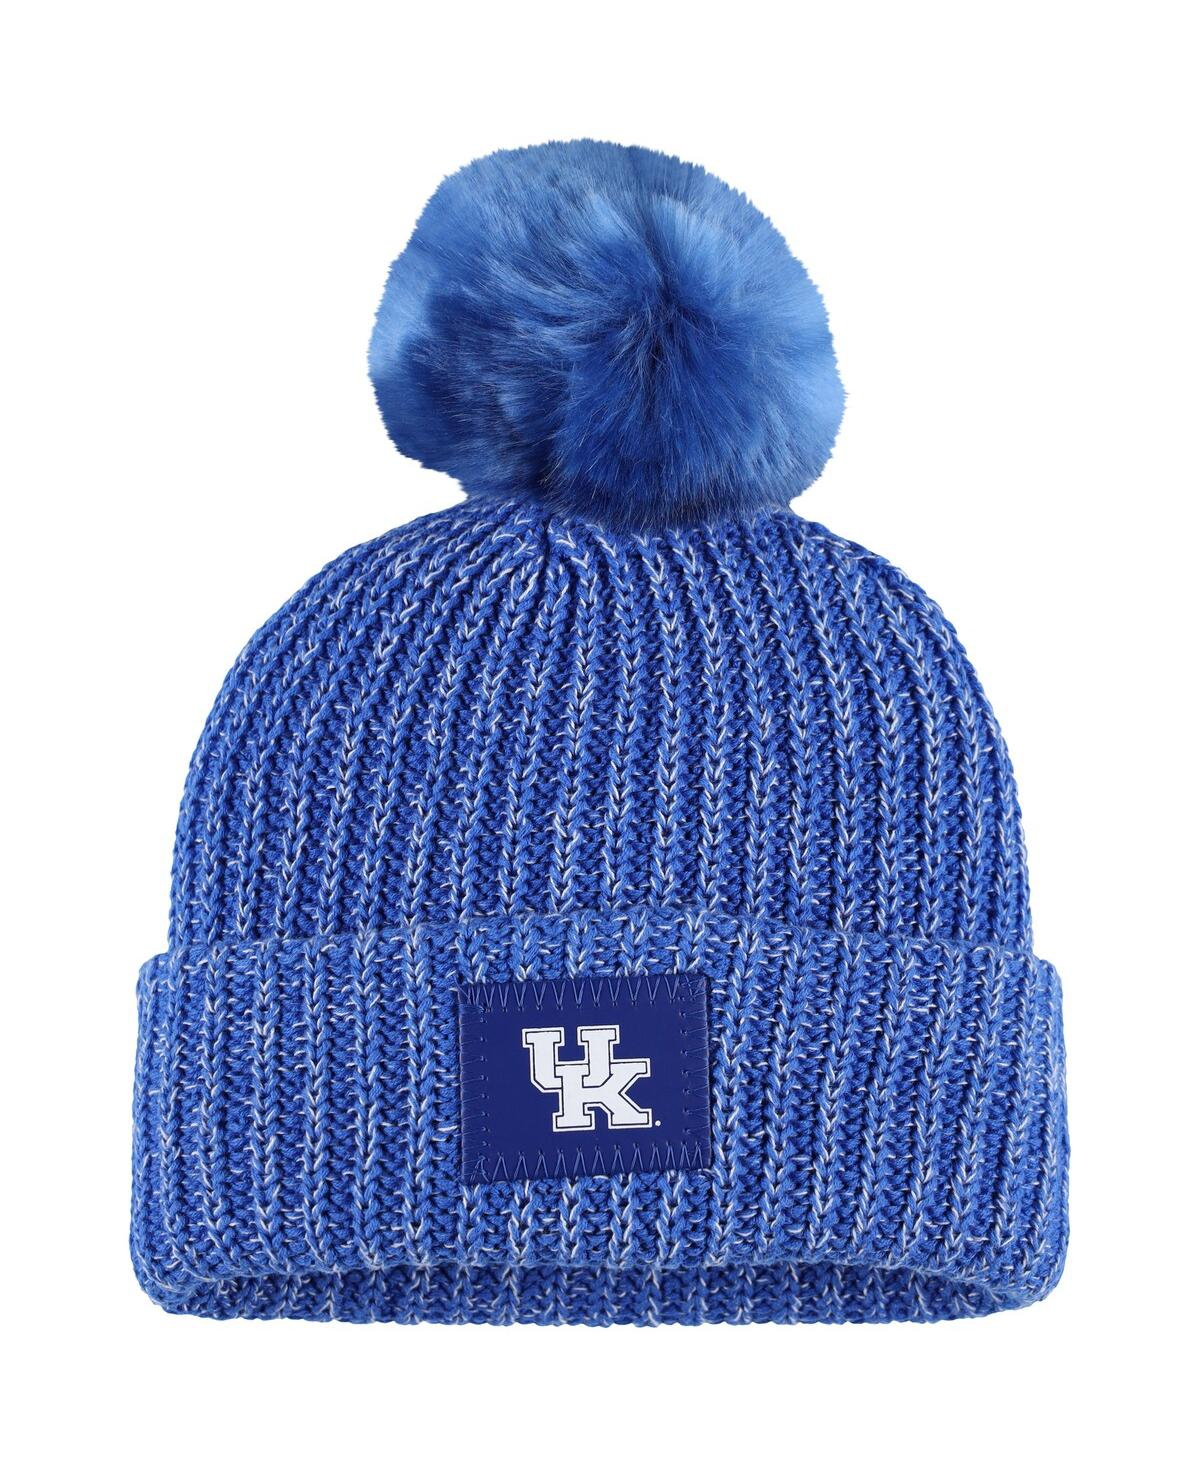 Women's Love Your Melon Royal Kentucky Wildcats Cuffed Knit Hat with Pom - Royal